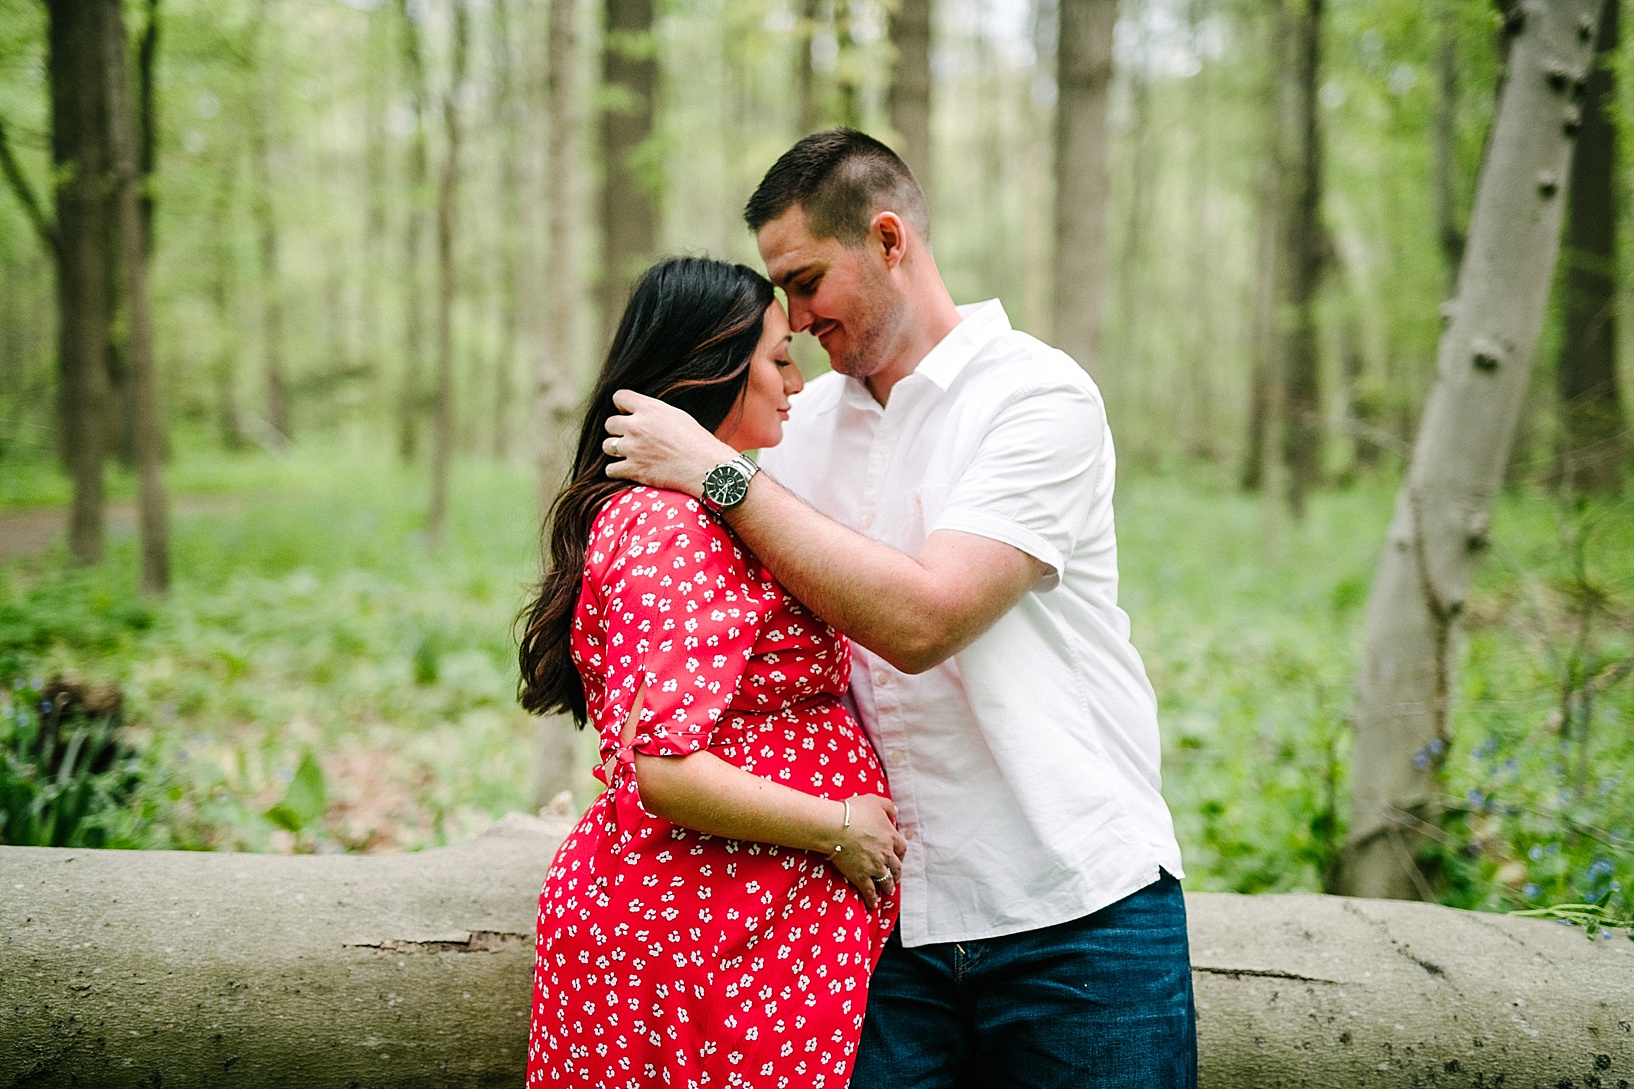 A couple in woods maternity photography shoot